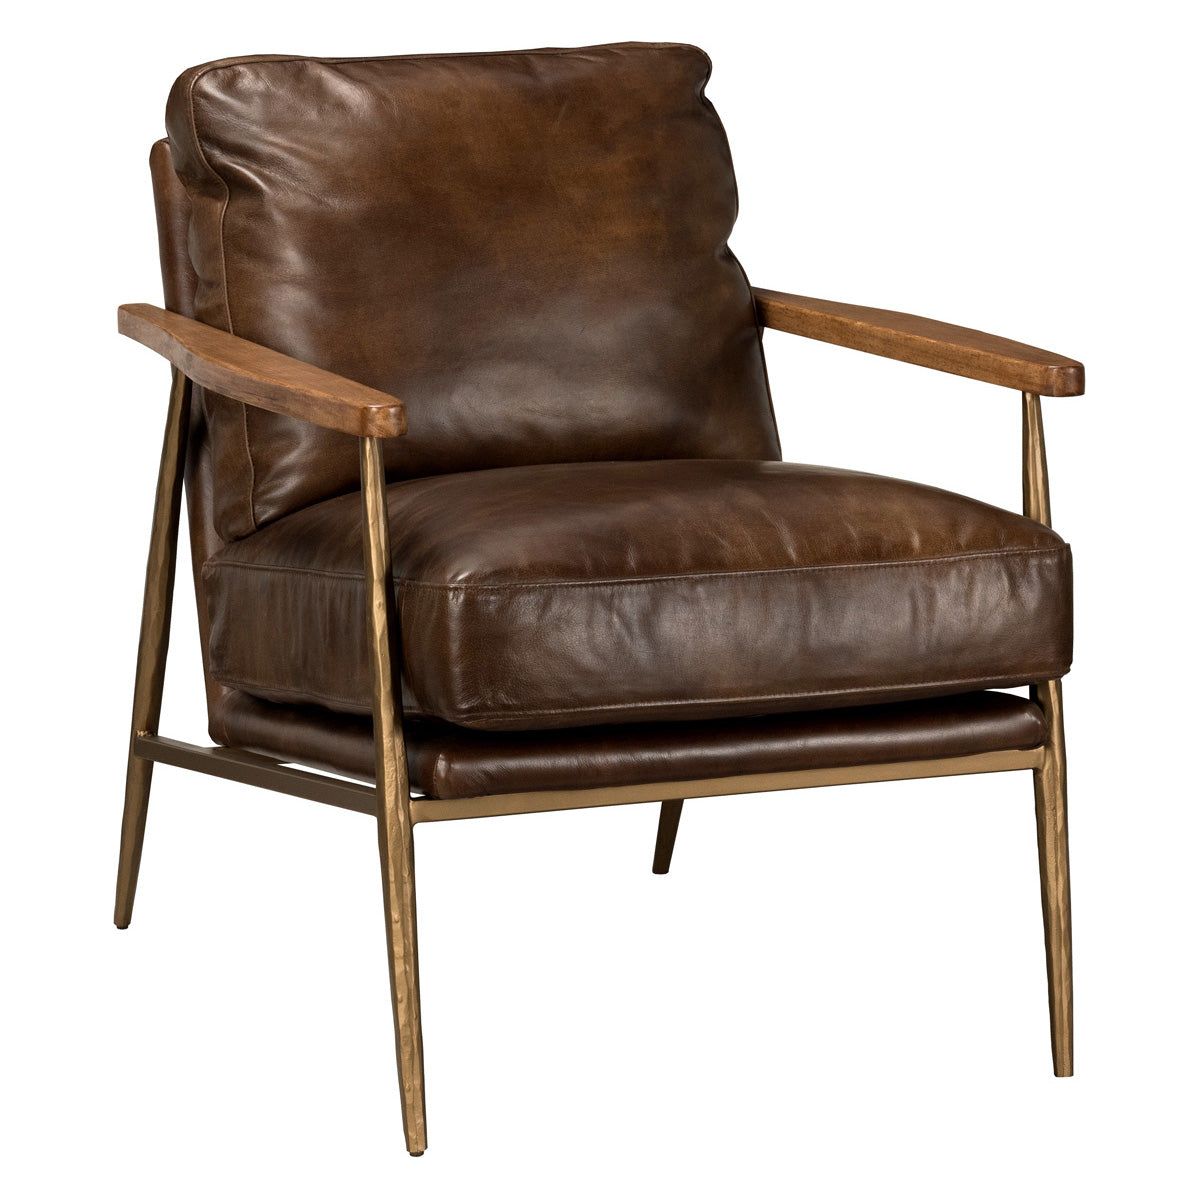 A Gimbal top grain leather armchair with a plush seat and back cushion. The chair has a sleek, hammered iron frame and natural wood armrests. The leather appears soft and richly colored, giving the chair a luxurious and comfortable look.